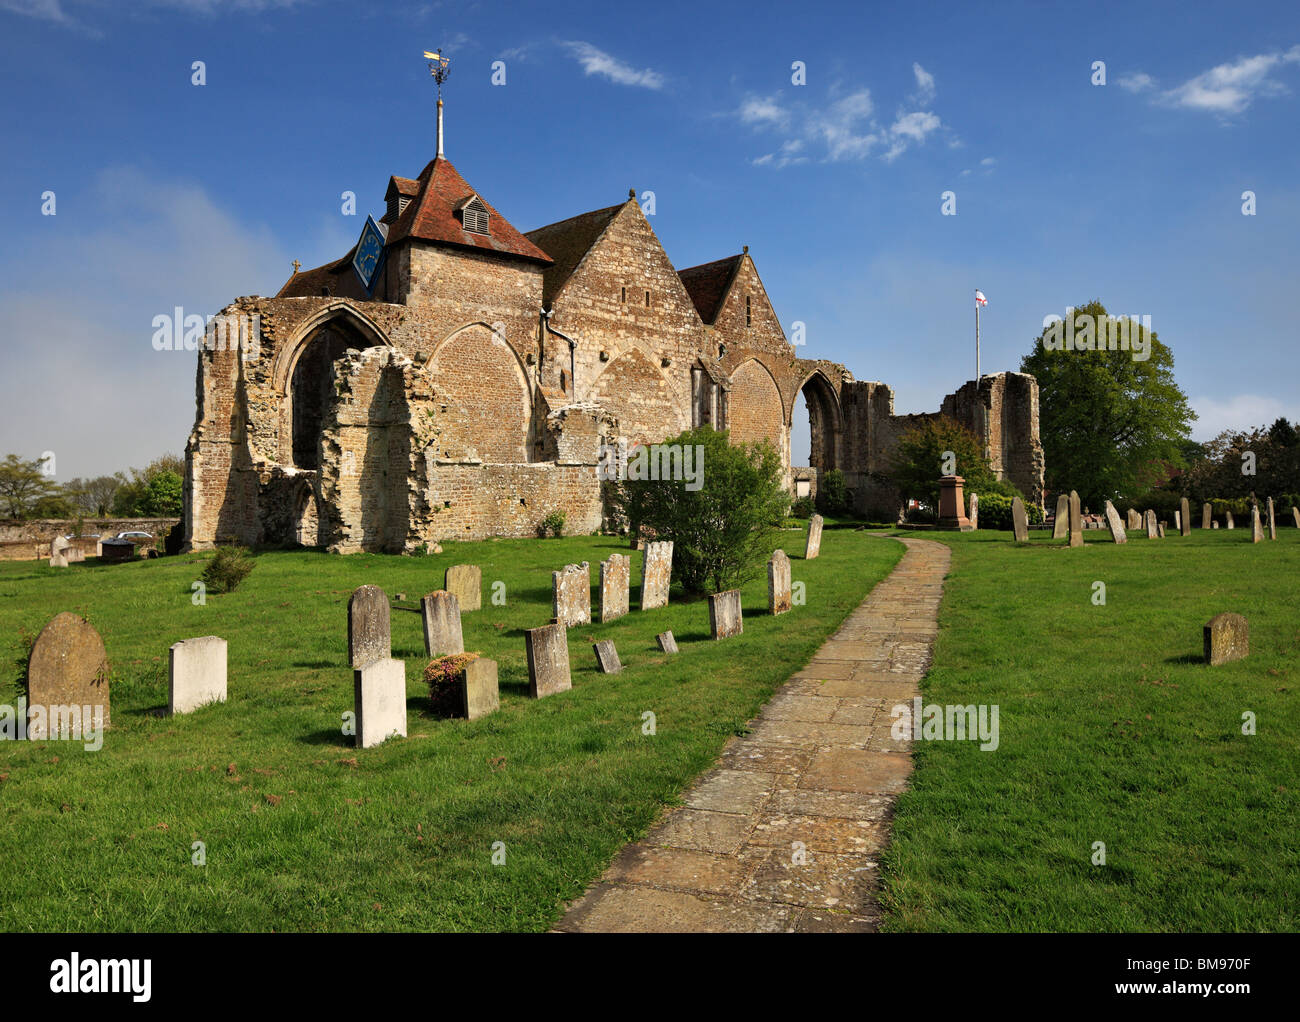 The Church of St. Thomas the Martyr, Winchelsea. Stock Photo